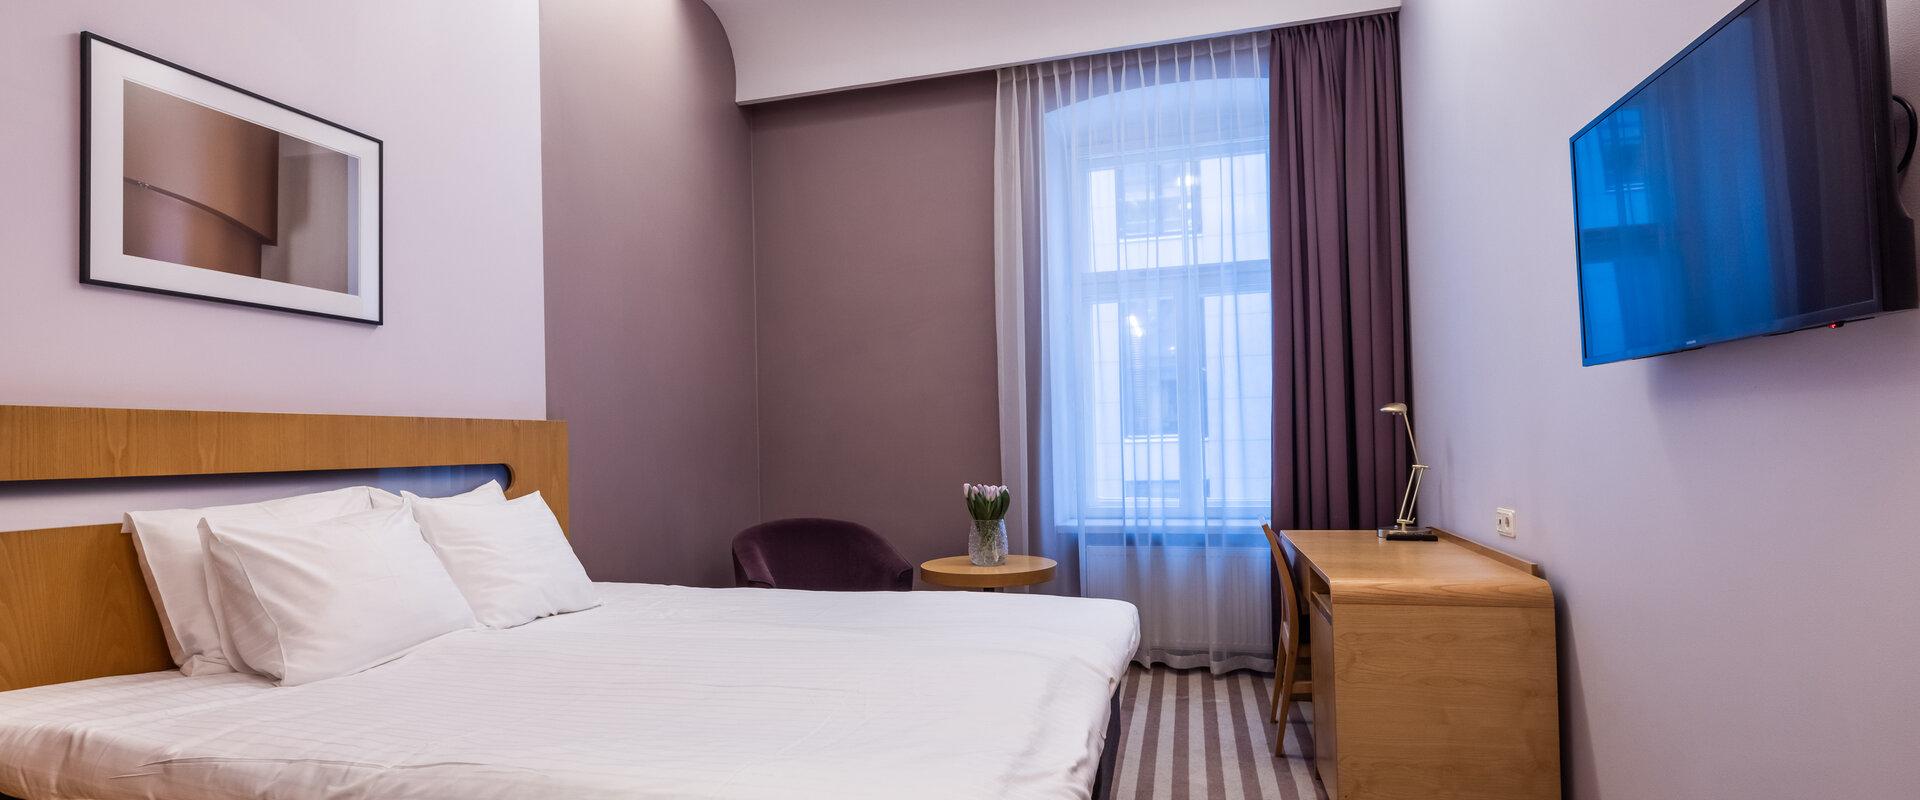 Hotel SOHO standard M room with double bed